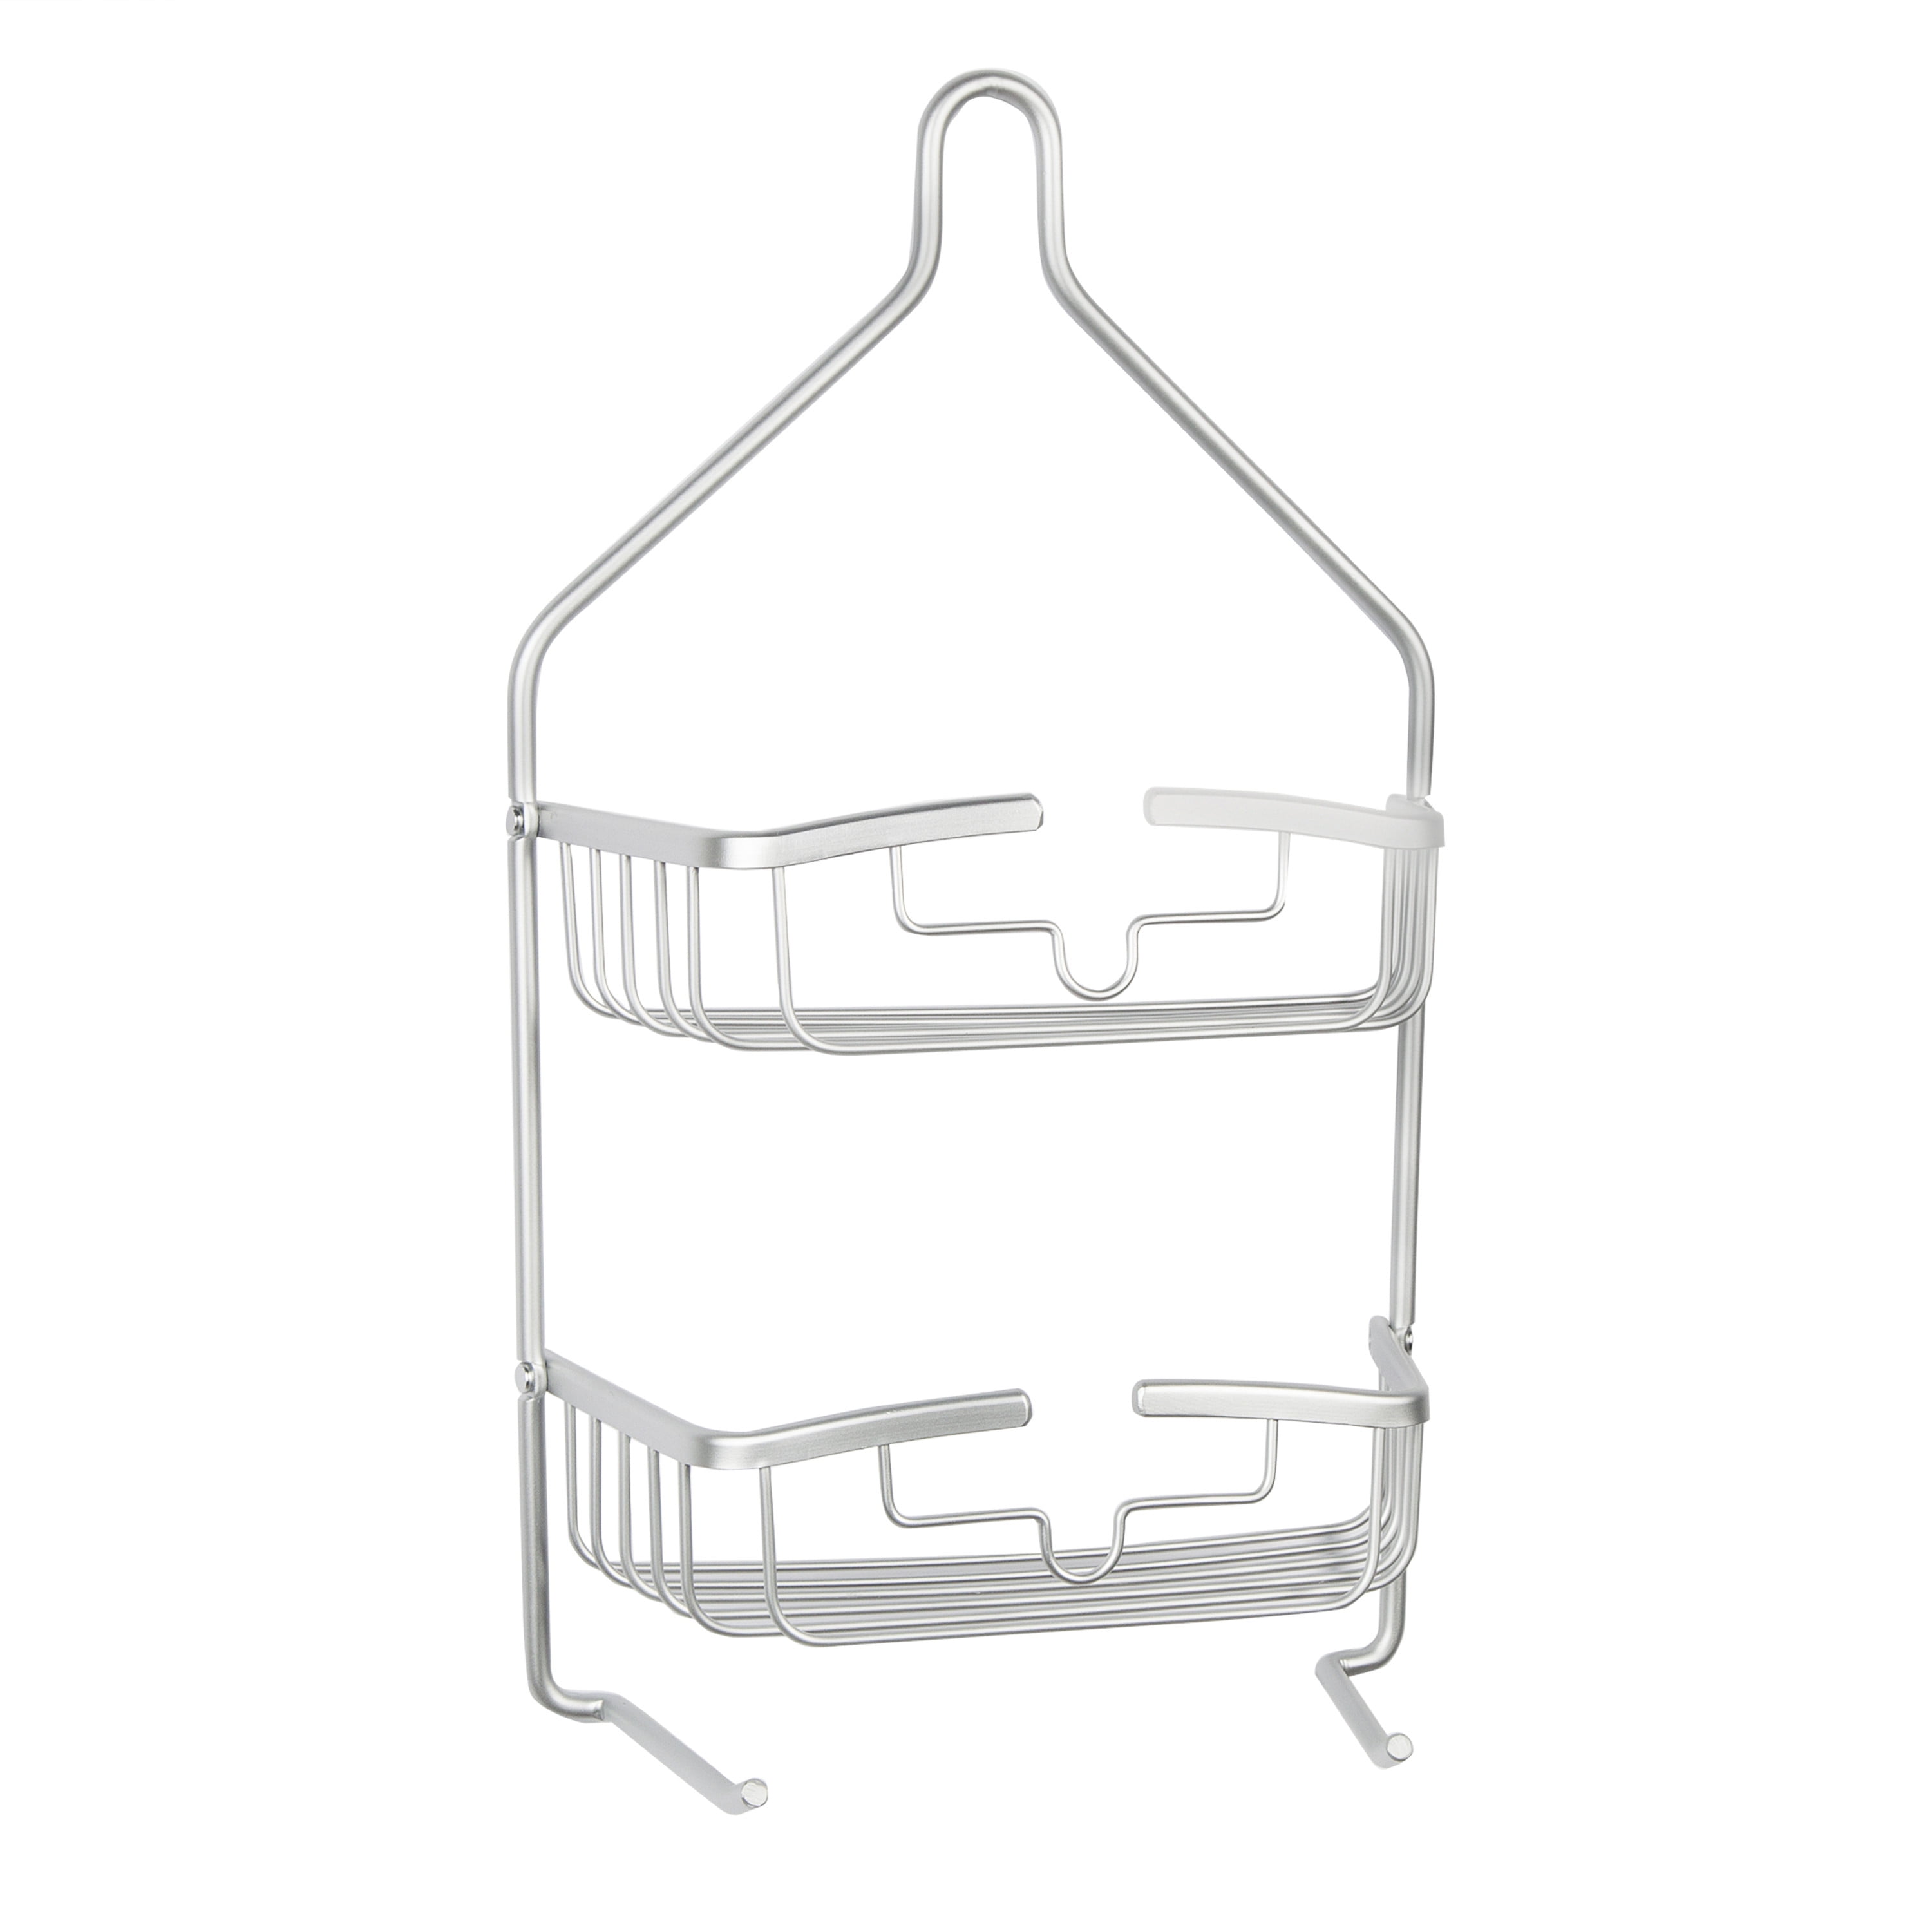 Kenney Rust-Resistant Heavy Duty 3-Tier Large Hanging Shower Caddy with Suction Cups and Four Razor Holders Chrome 